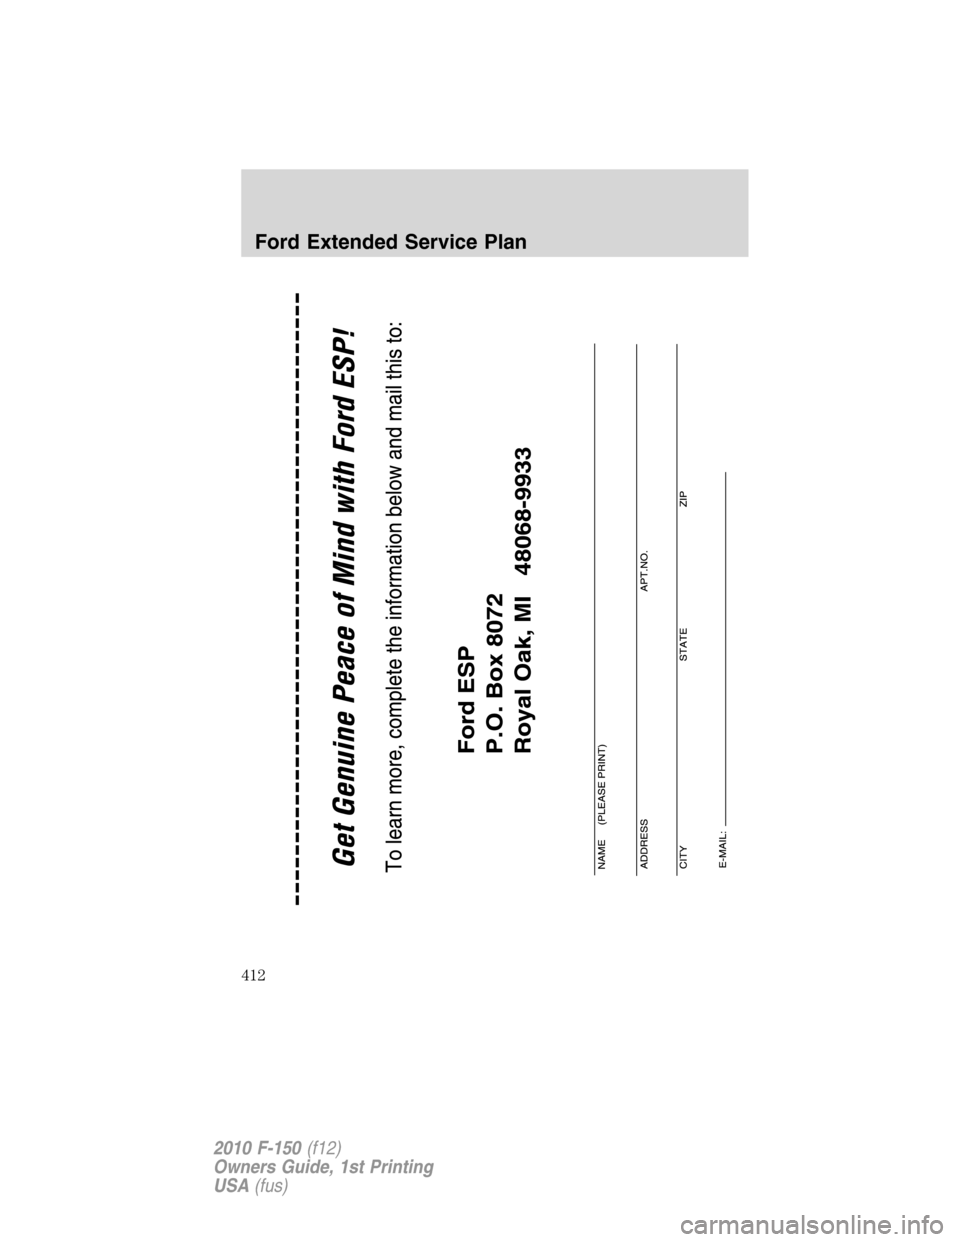 FORD F150 2010 12.G Owners Manual Ford Extended Service Plan
412
2010 F-150(f12)
Owners Guide, 1st Printing
USA(fus) 